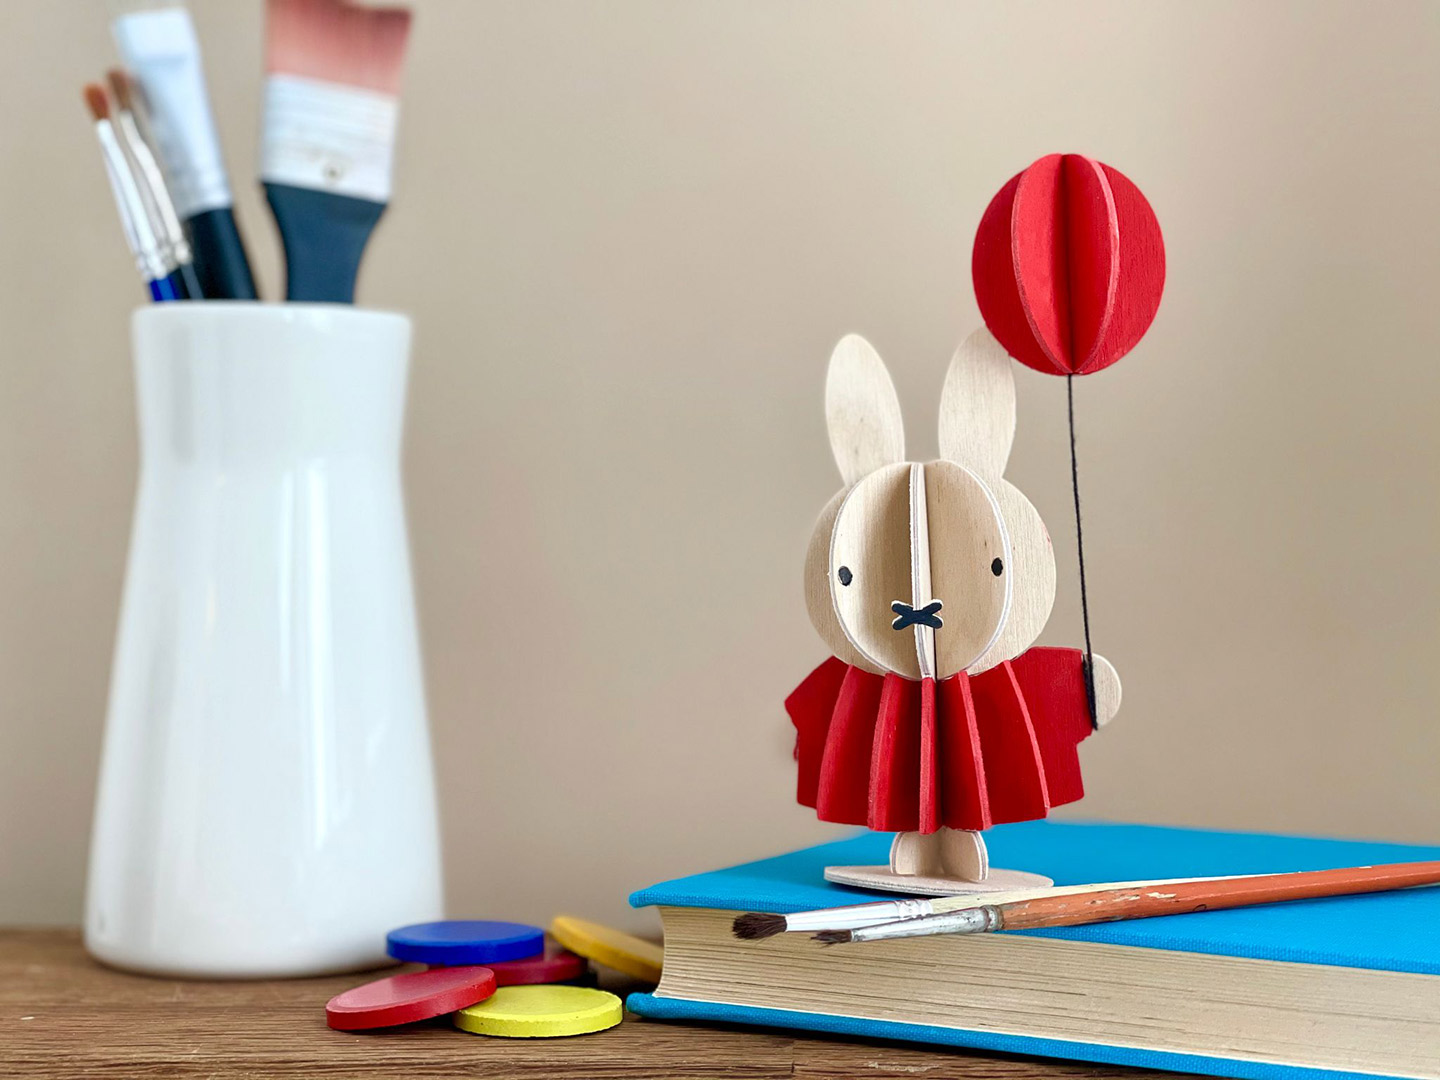 Wooden Miffy and Balloon by Lovi standing on the book. Paint yourself figures are creative Valentine's Day gifts.